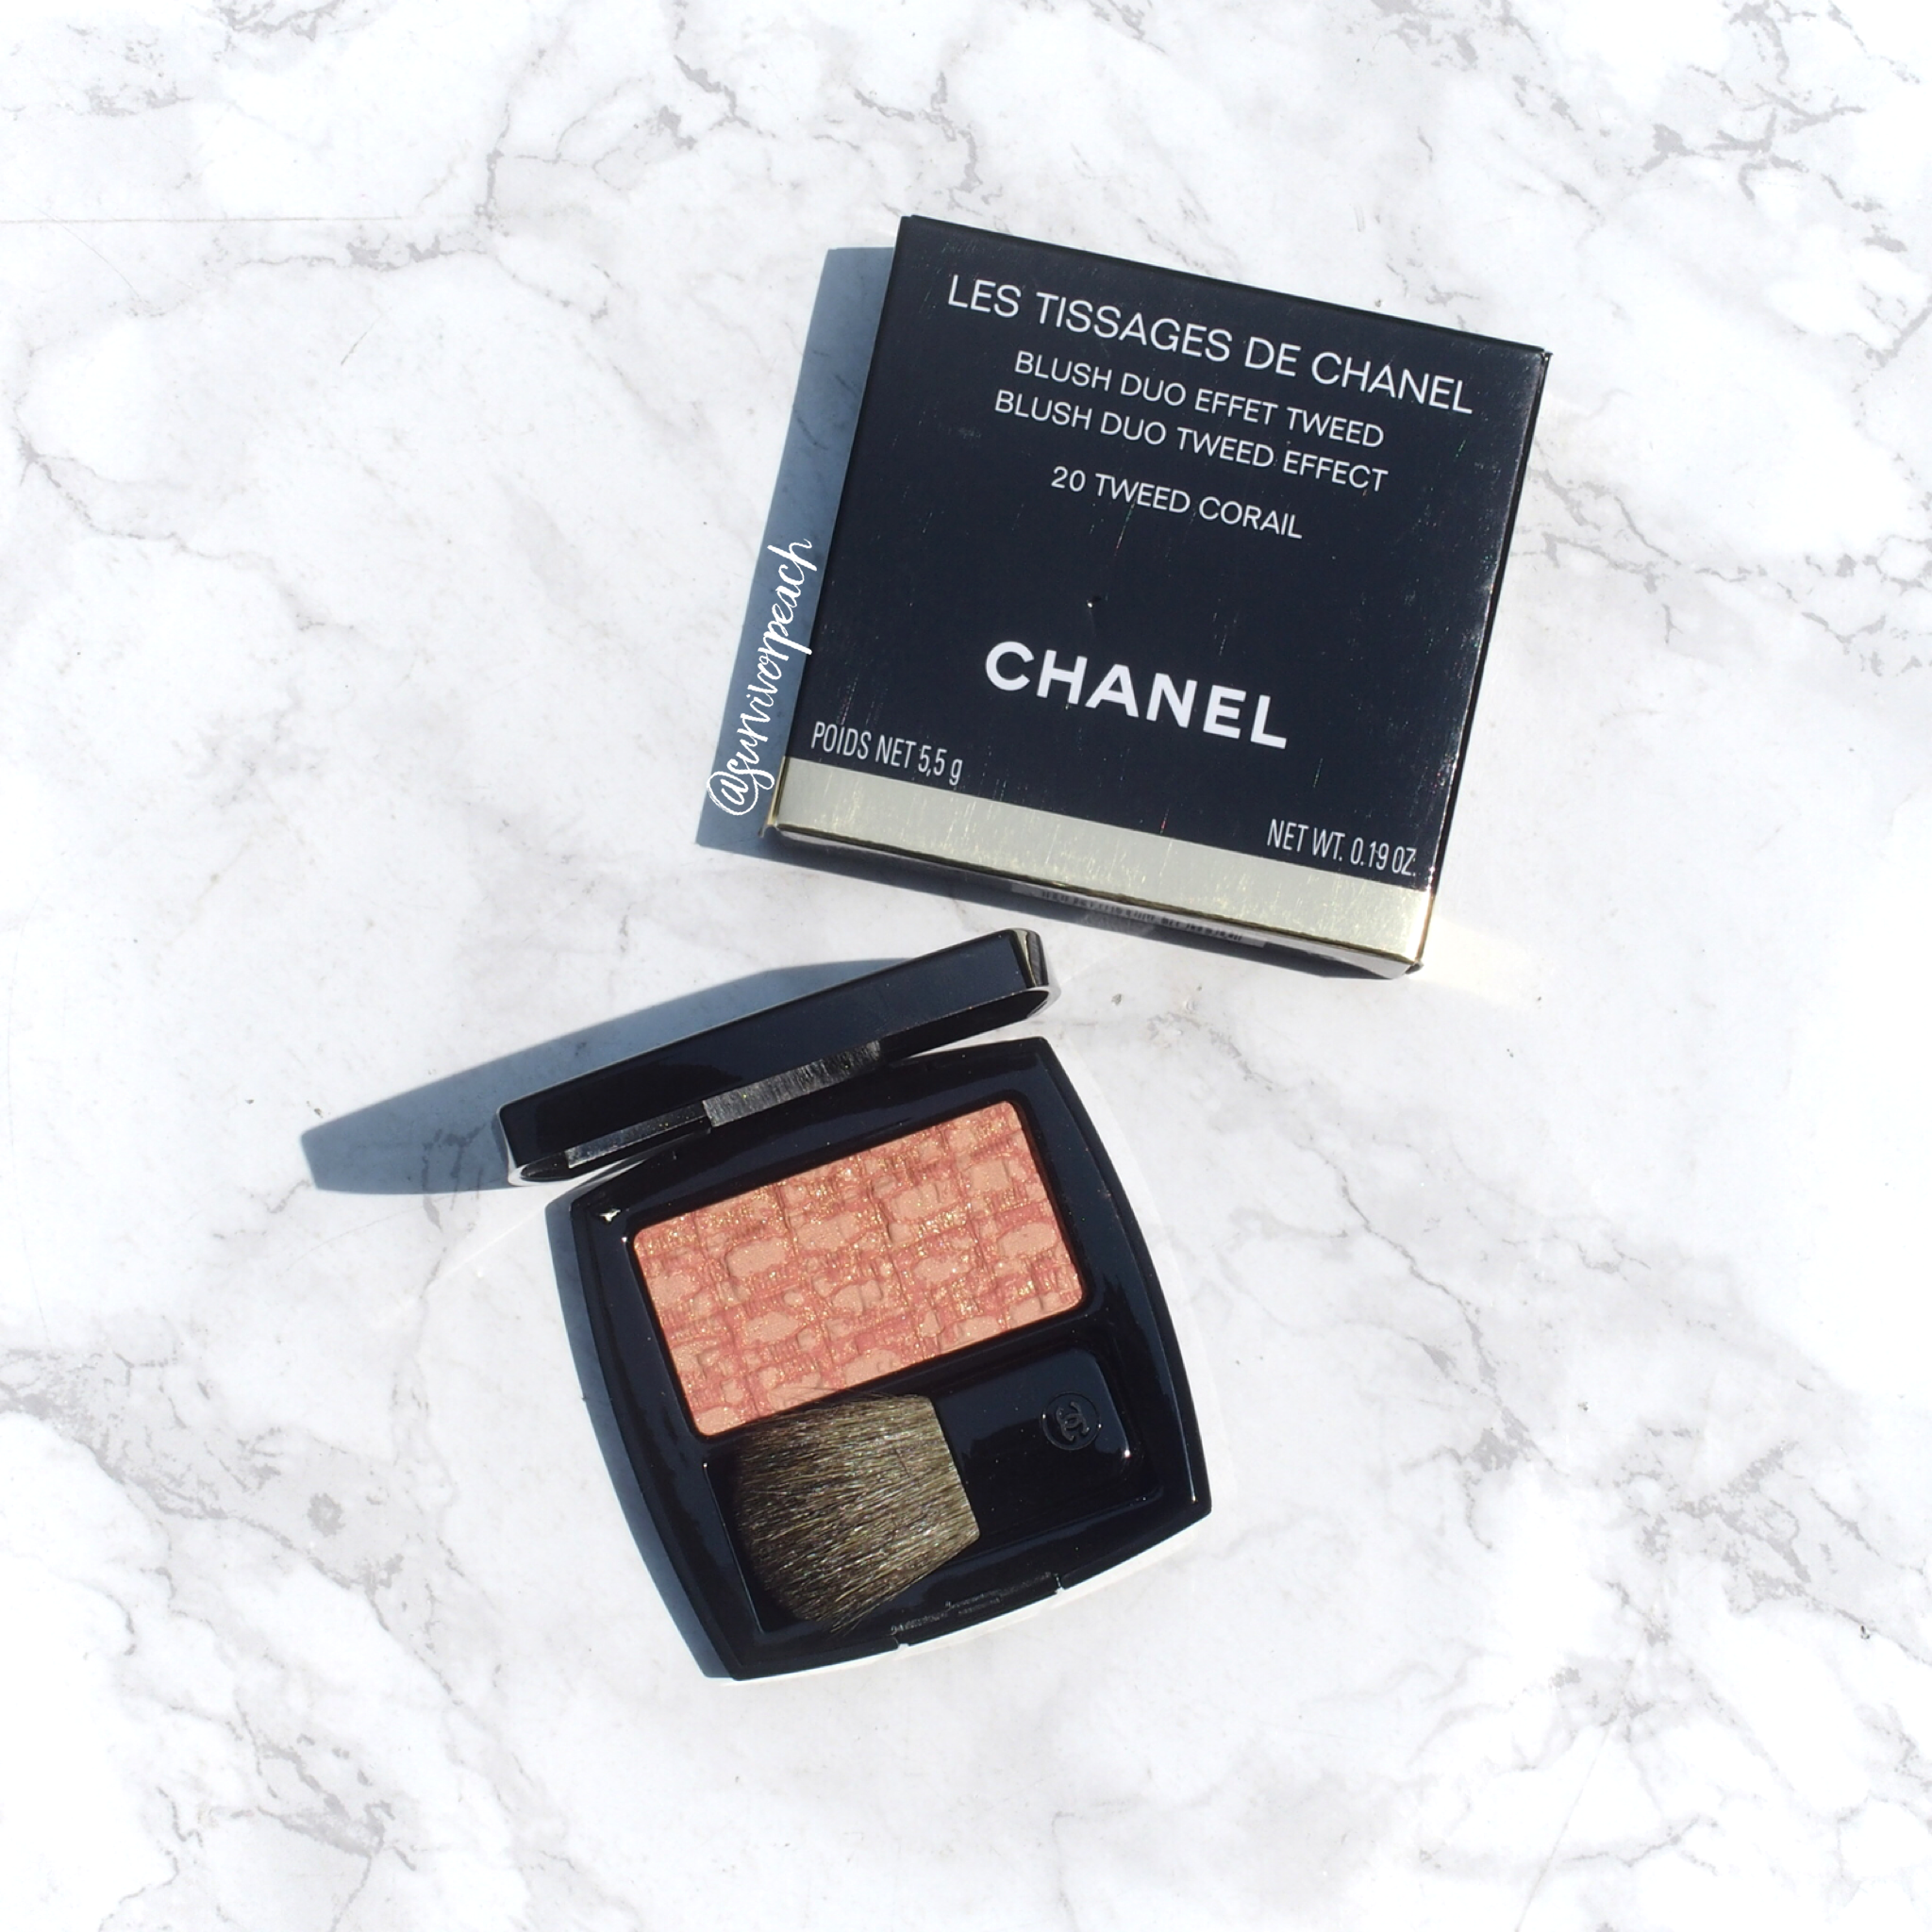 Chanel Coco Gloss: My love for Gloss is back! + Chanel Tweed Coral blush  review — Survivorpeach